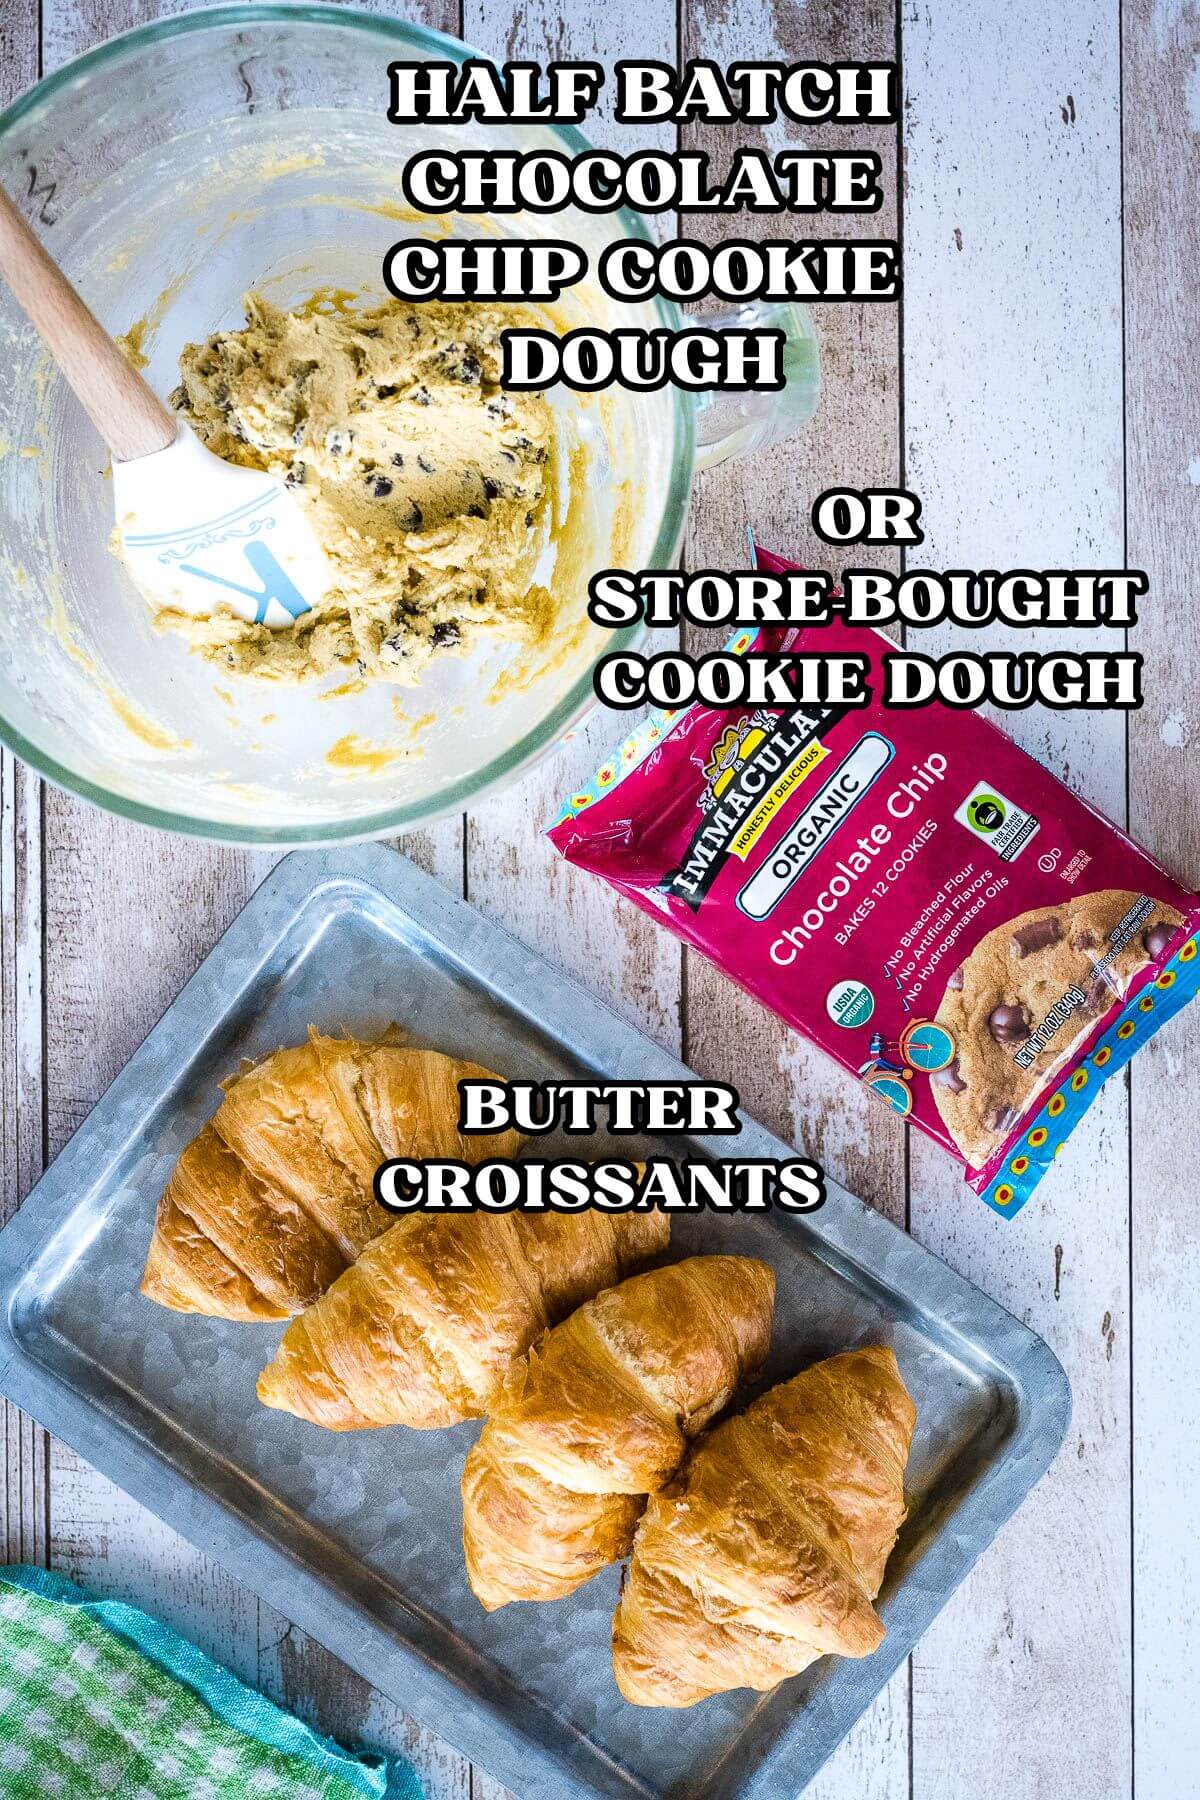 Labeled ingredients for Le Crookies, Cookie Croissants.